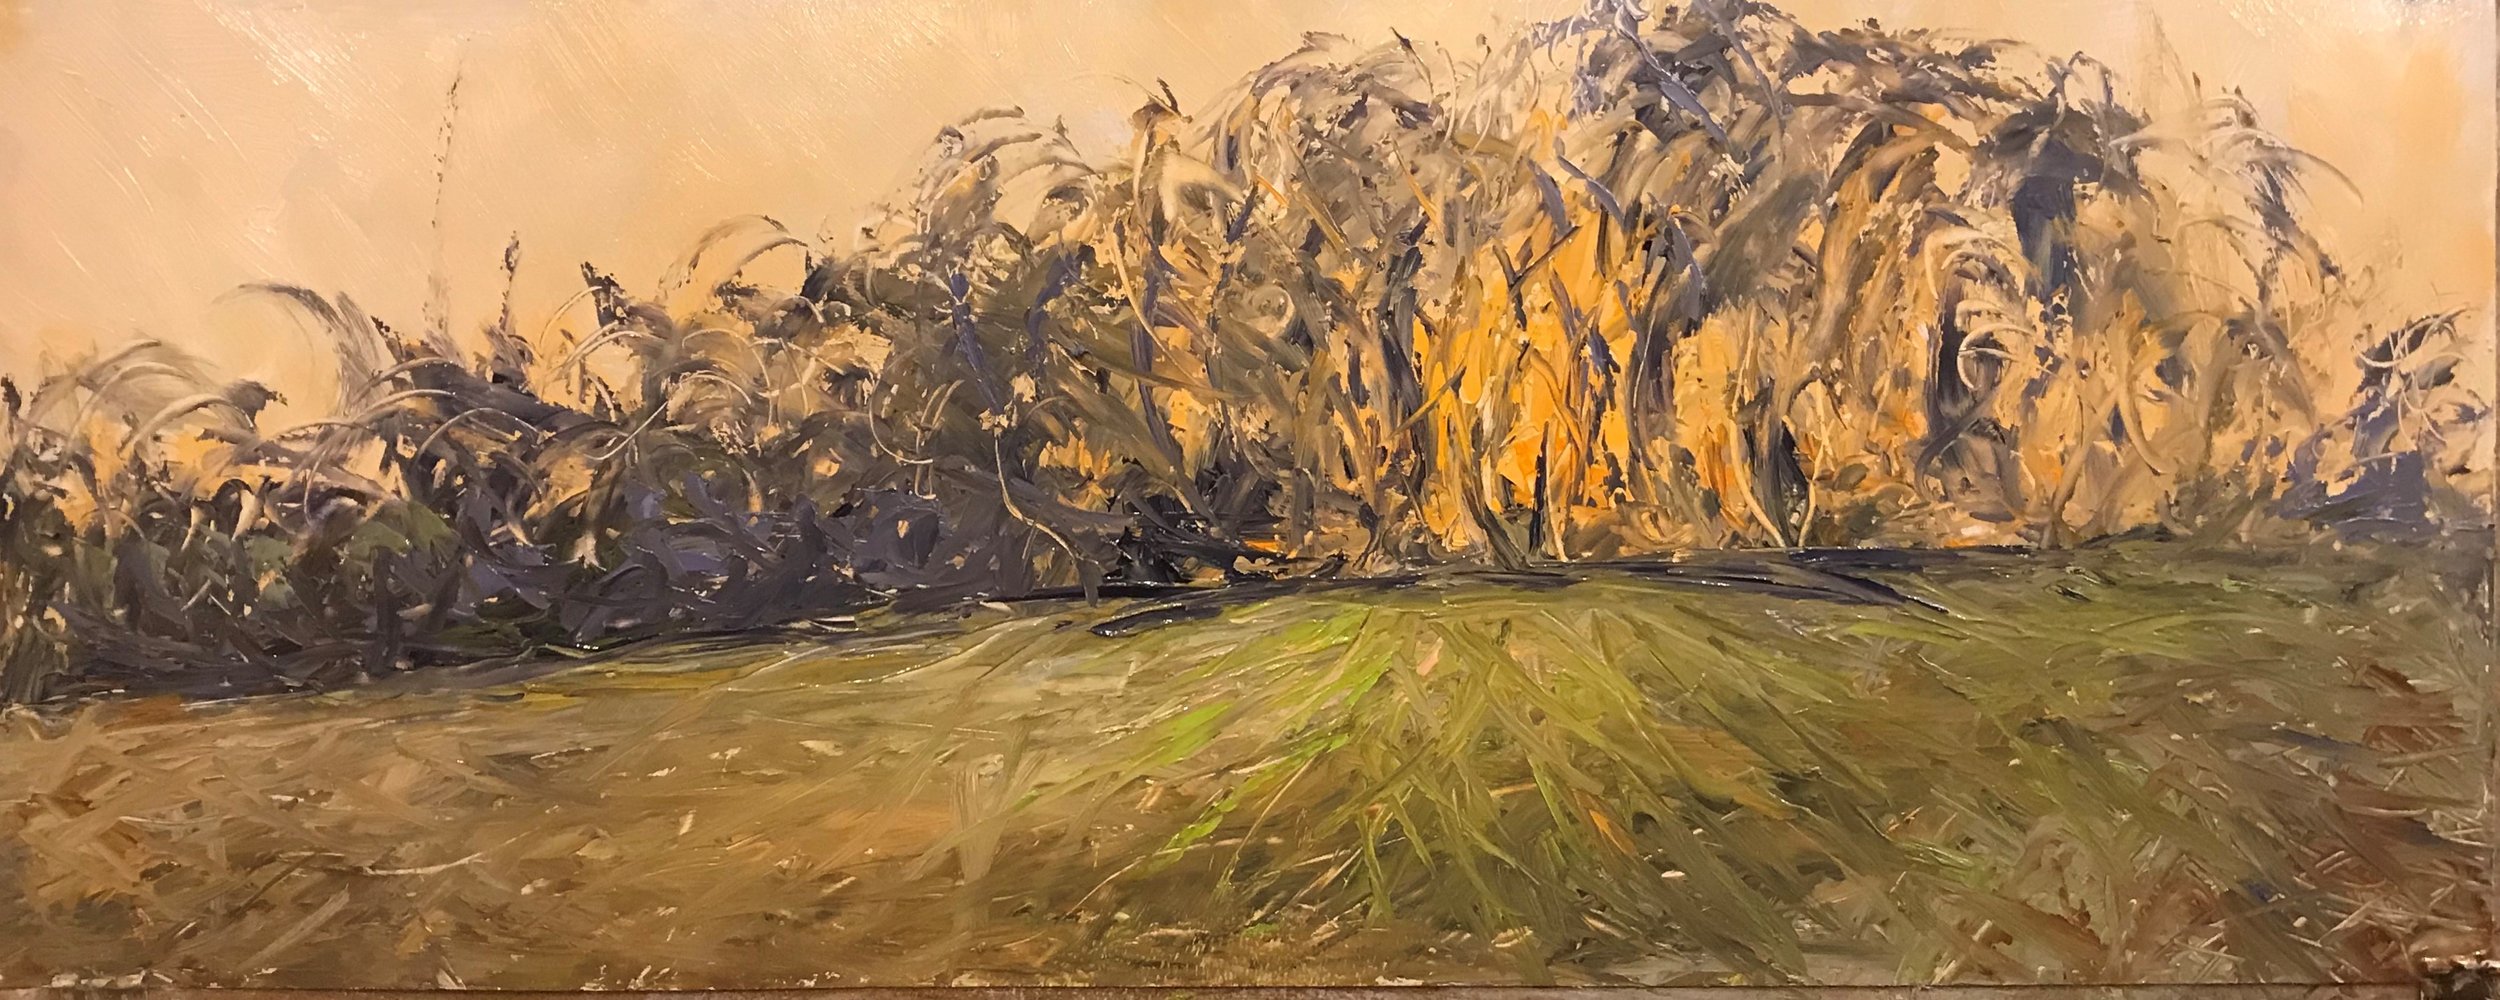 20-11-09  Sunset behind the Tree Line   Oil on Panel   8.75 x 22 inches.jpg